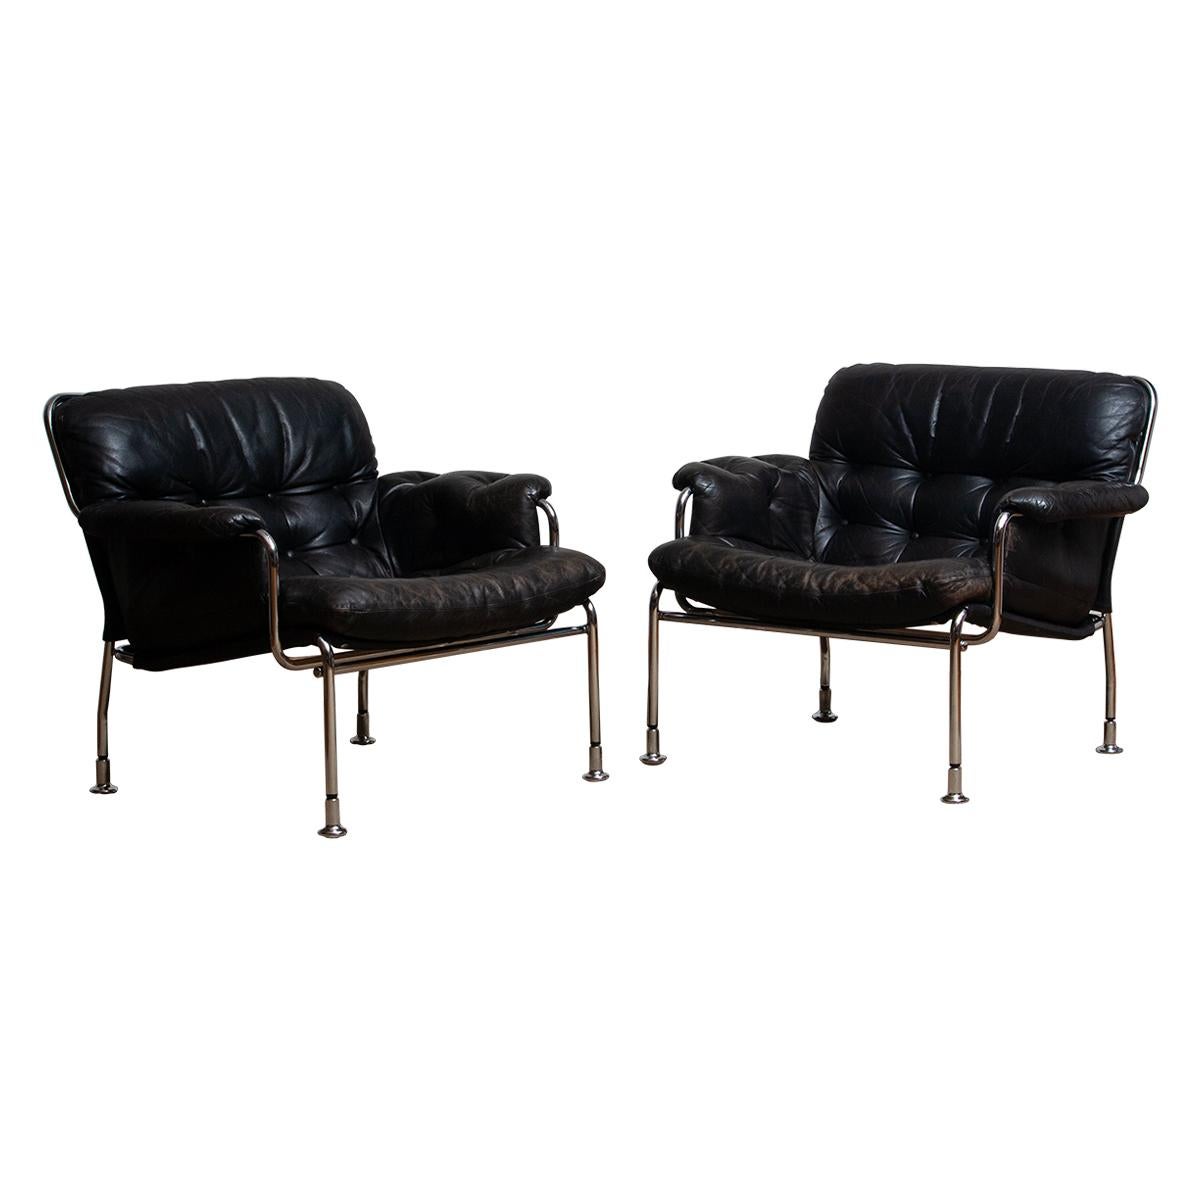 Beautiful set of two lounge / easy chairs in aged black leather and chrome designed by Pethrus Lindlöfs for A.B. Lindlöfs Möbler Lammhult Sweden. Model Eva.
The aged leather on both chairs gives these chairs the typical vintage character. The